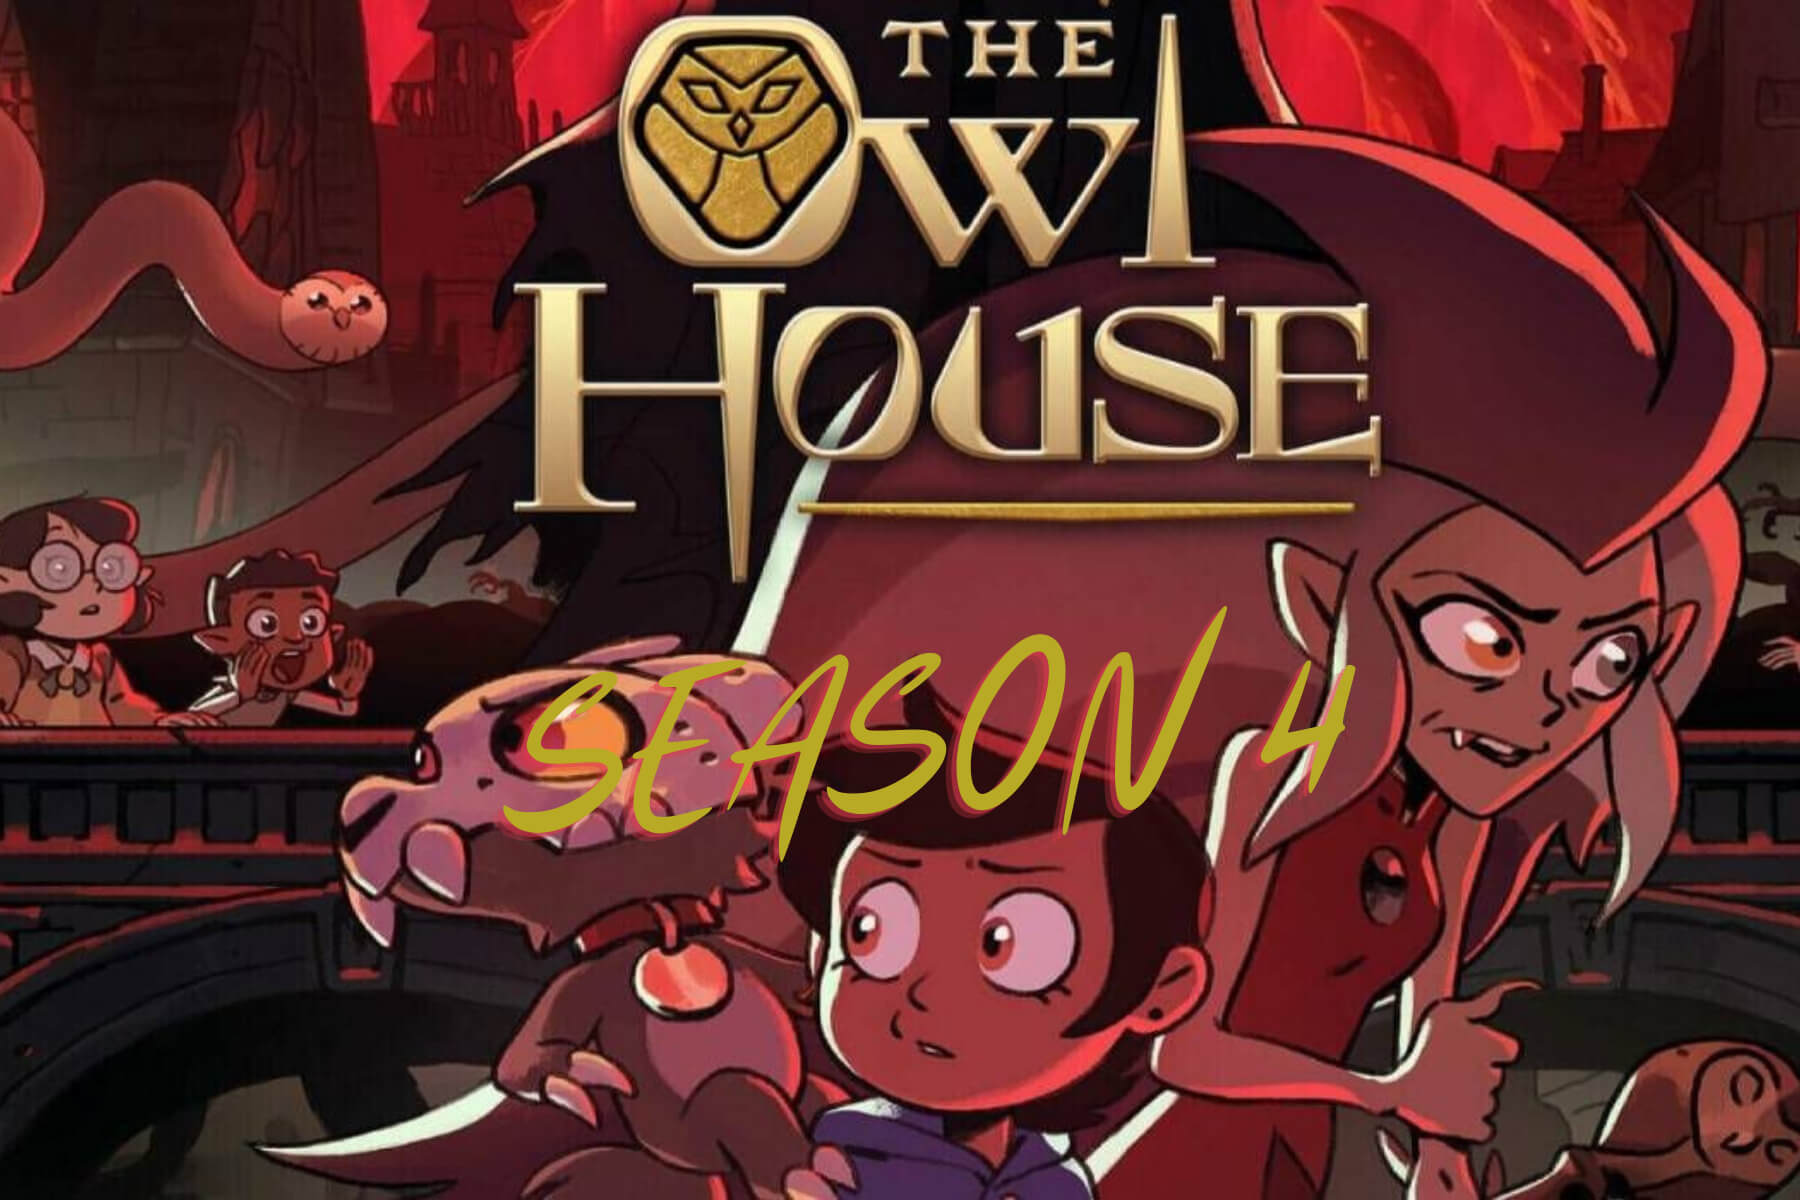 The Owl House season 3 release date, cast, plot and everything you